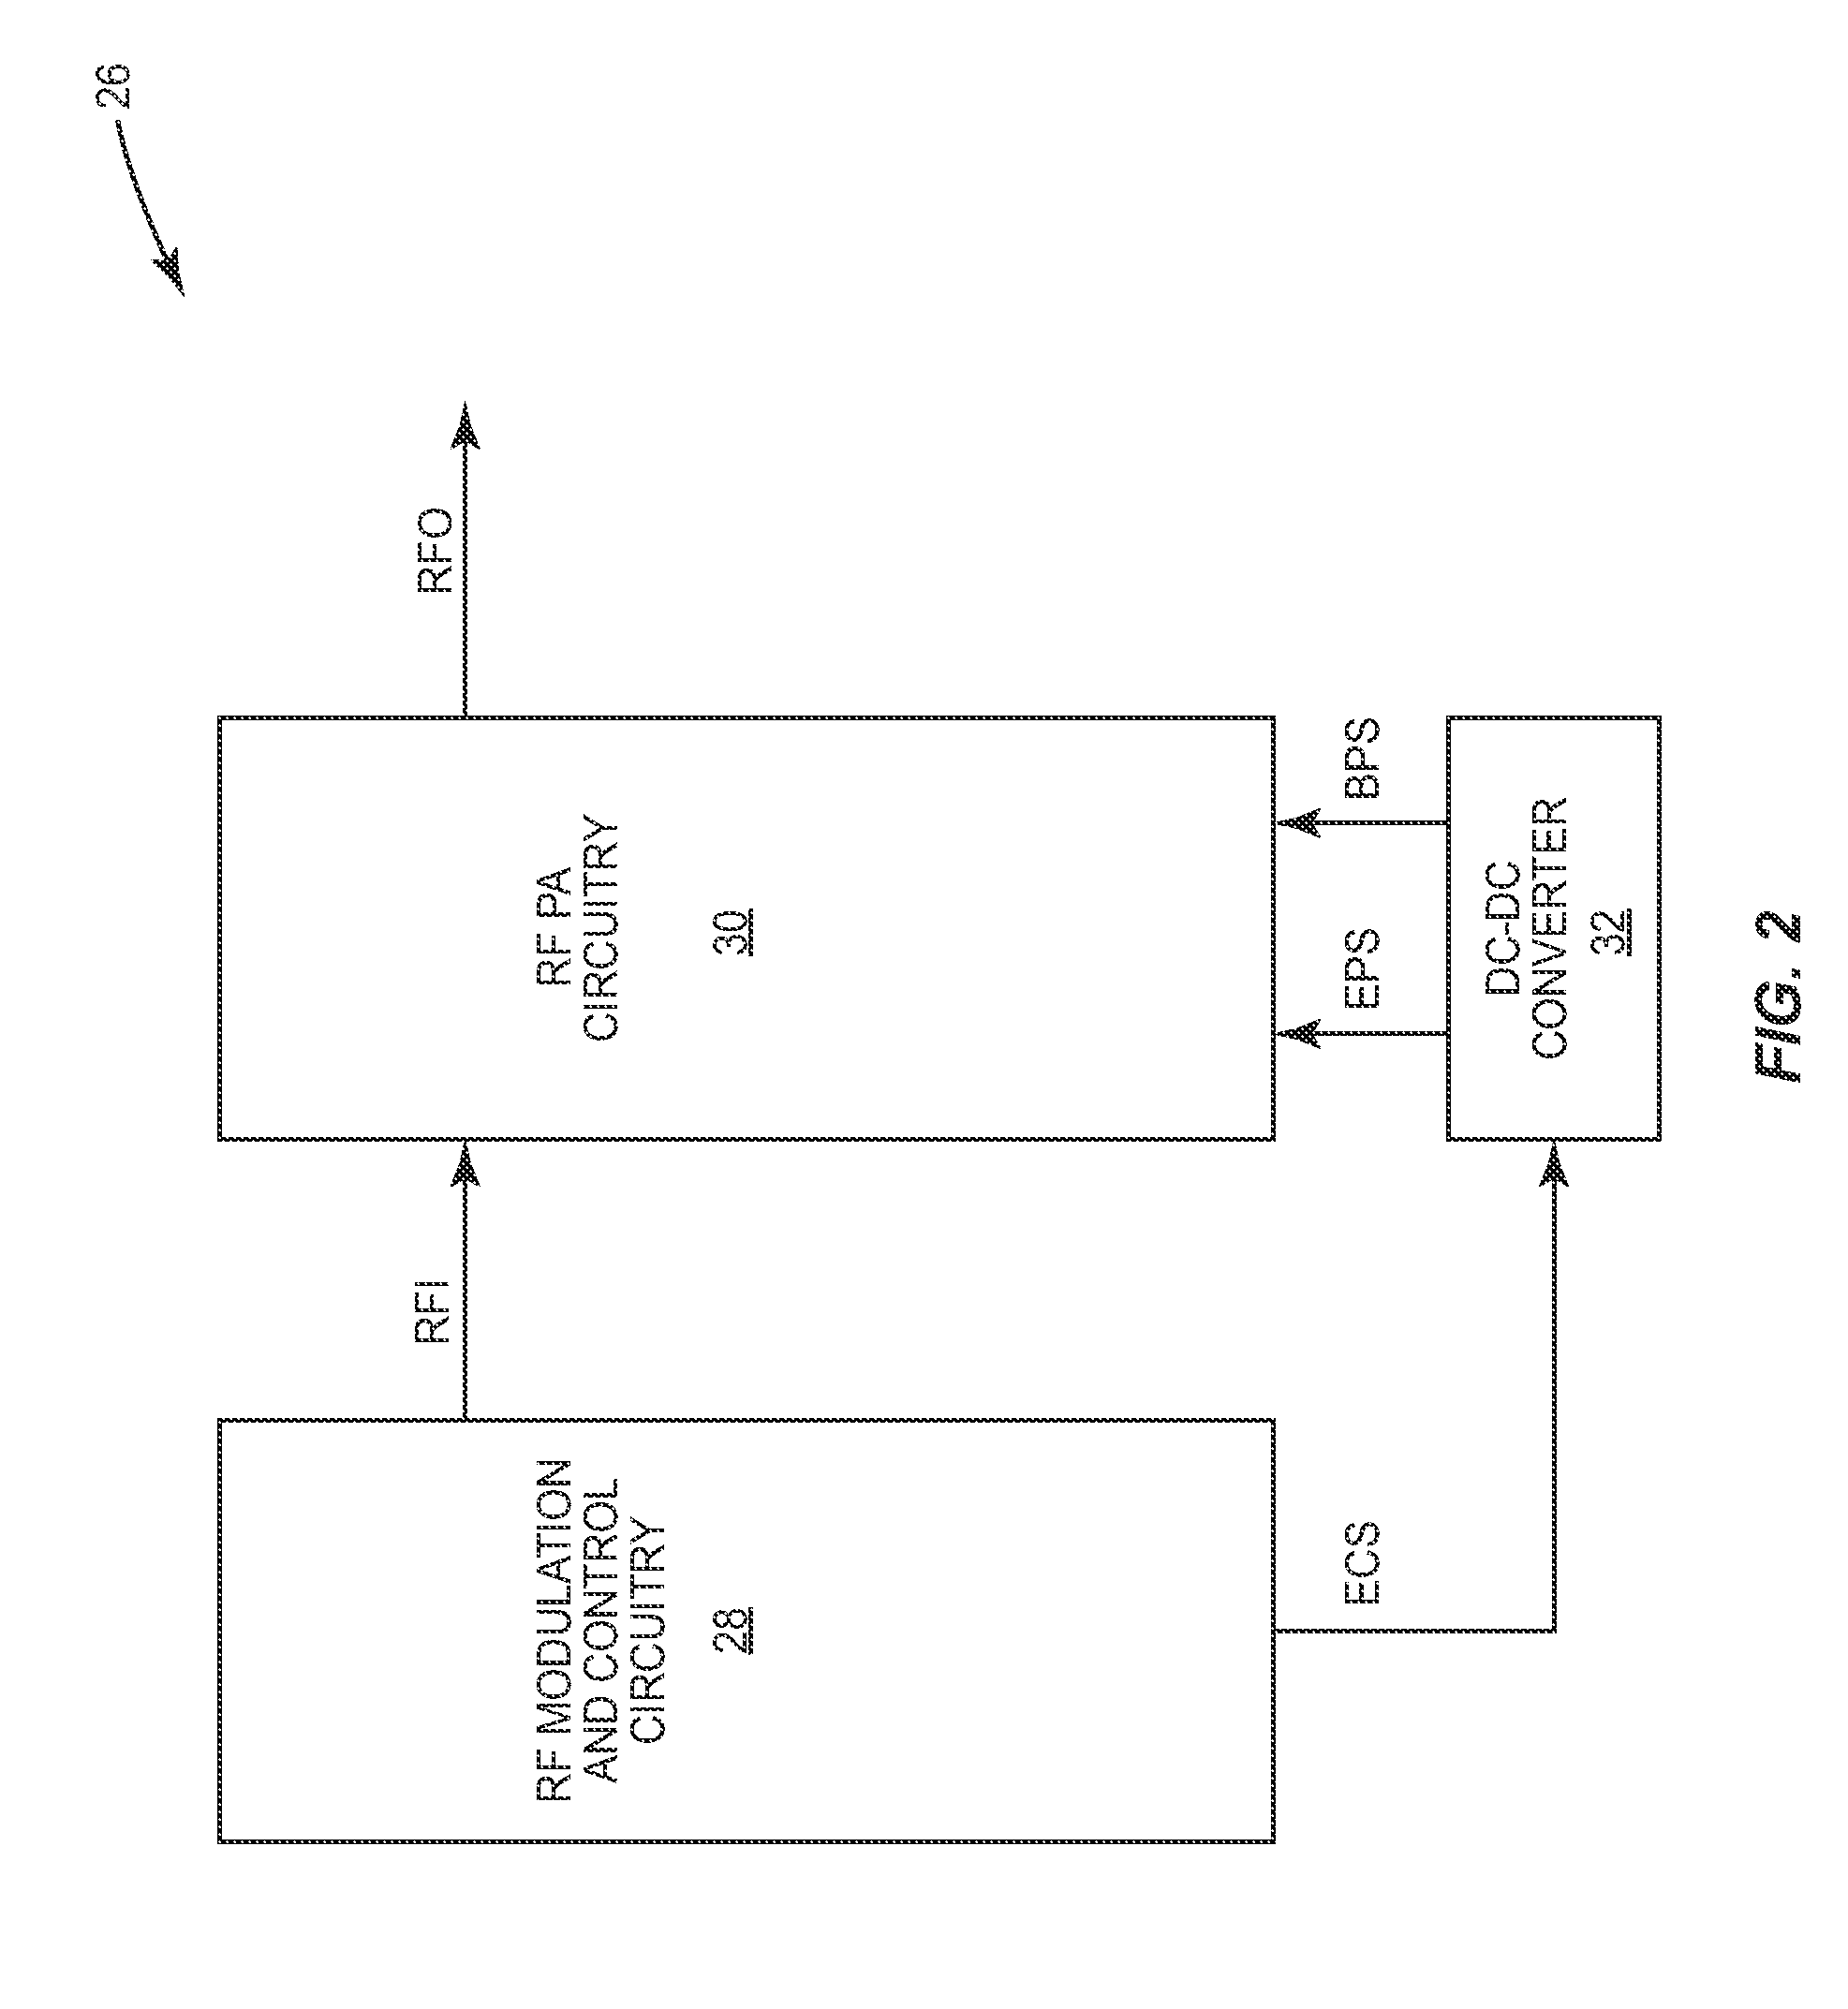 Envelope power supply calibration of a multi-mode radio frequency power amplifier